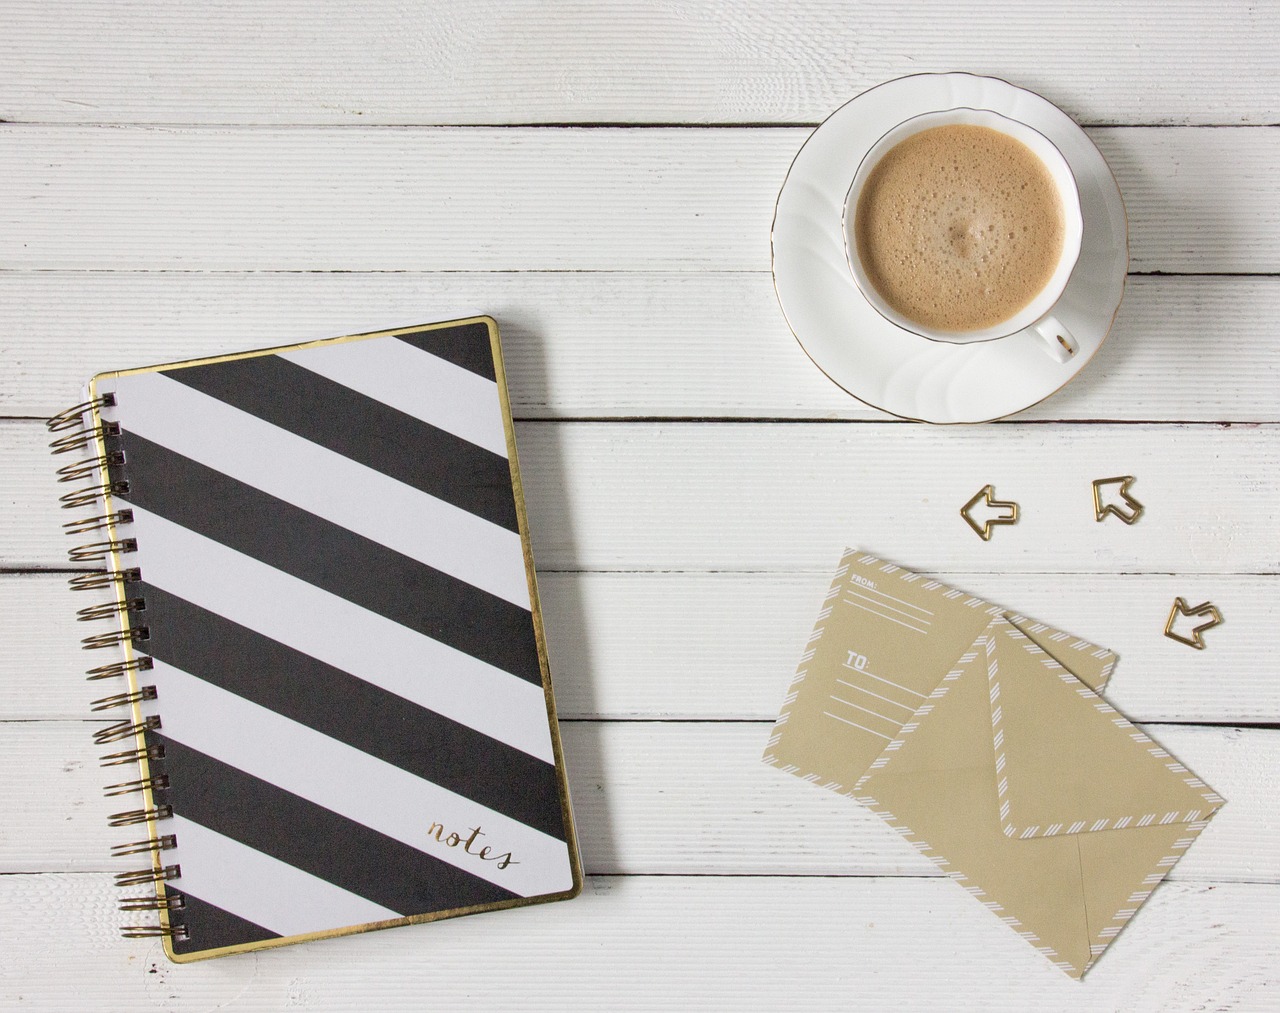 Envelope, coffee and stationery - email marketing tip